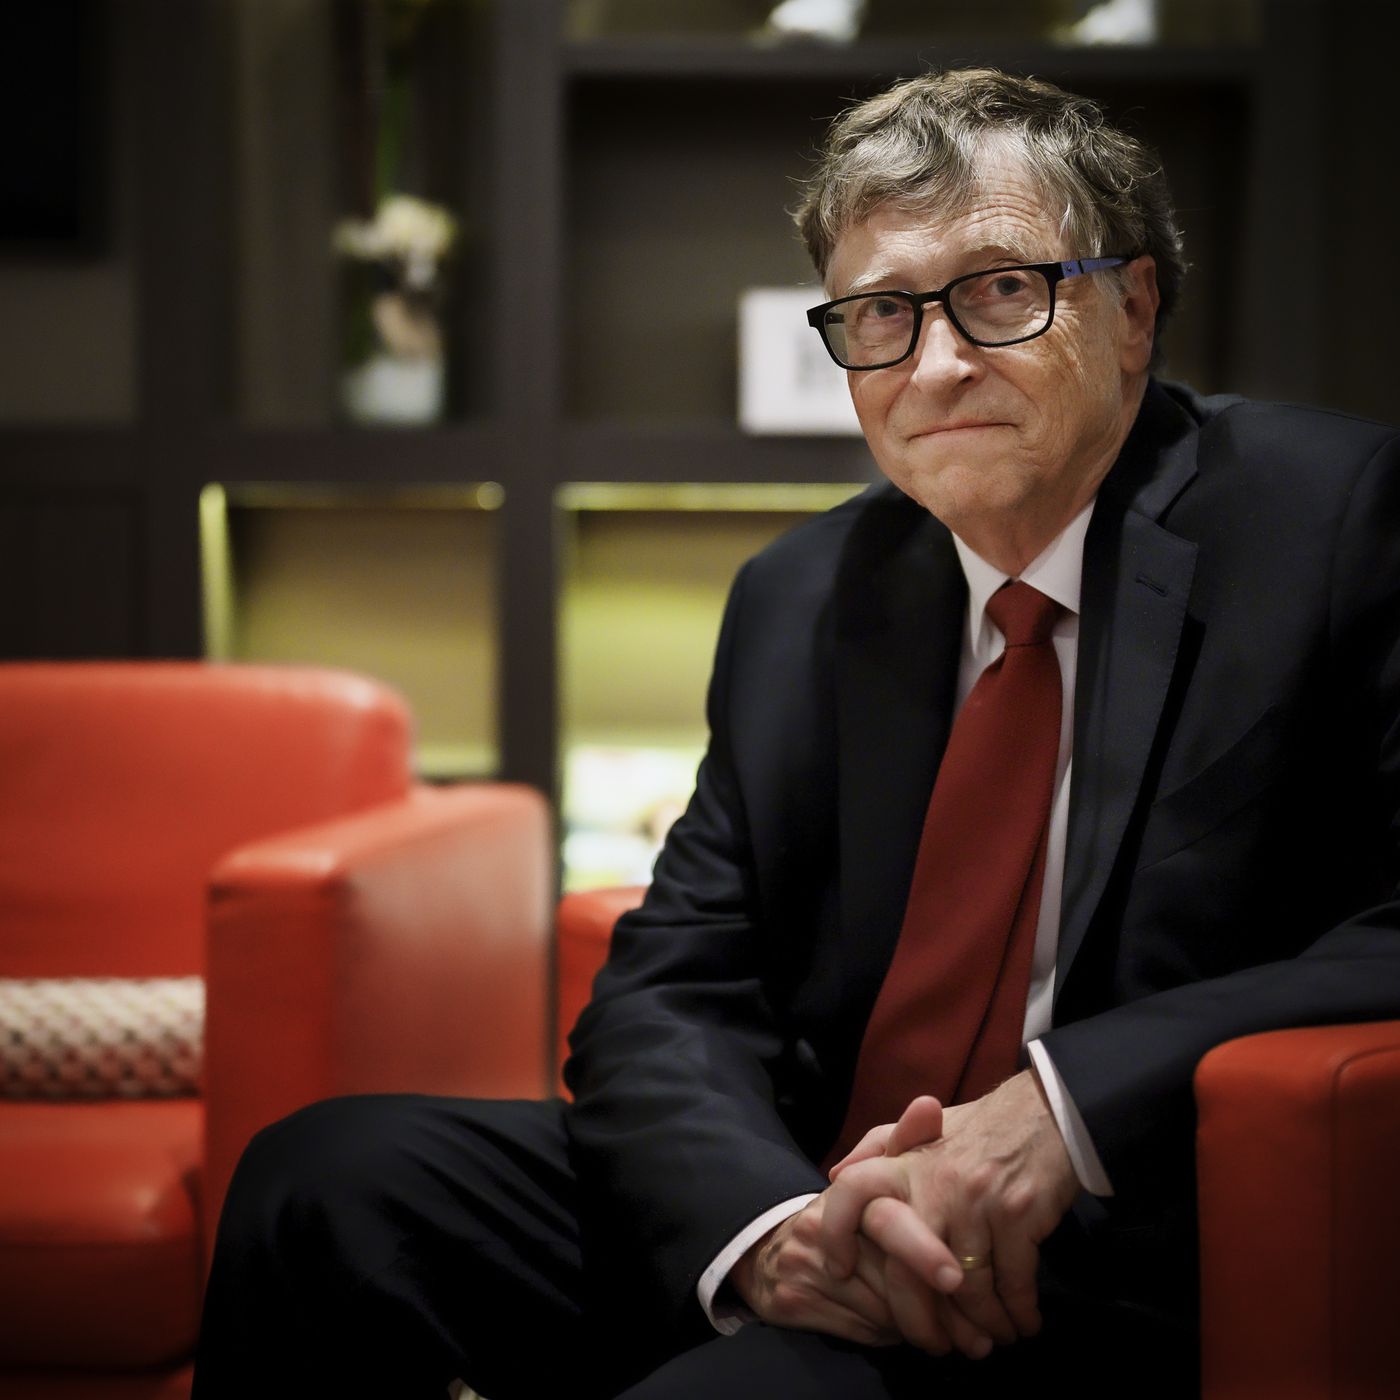 Bill Gates reveals why he doesn’t own cryptocurrency